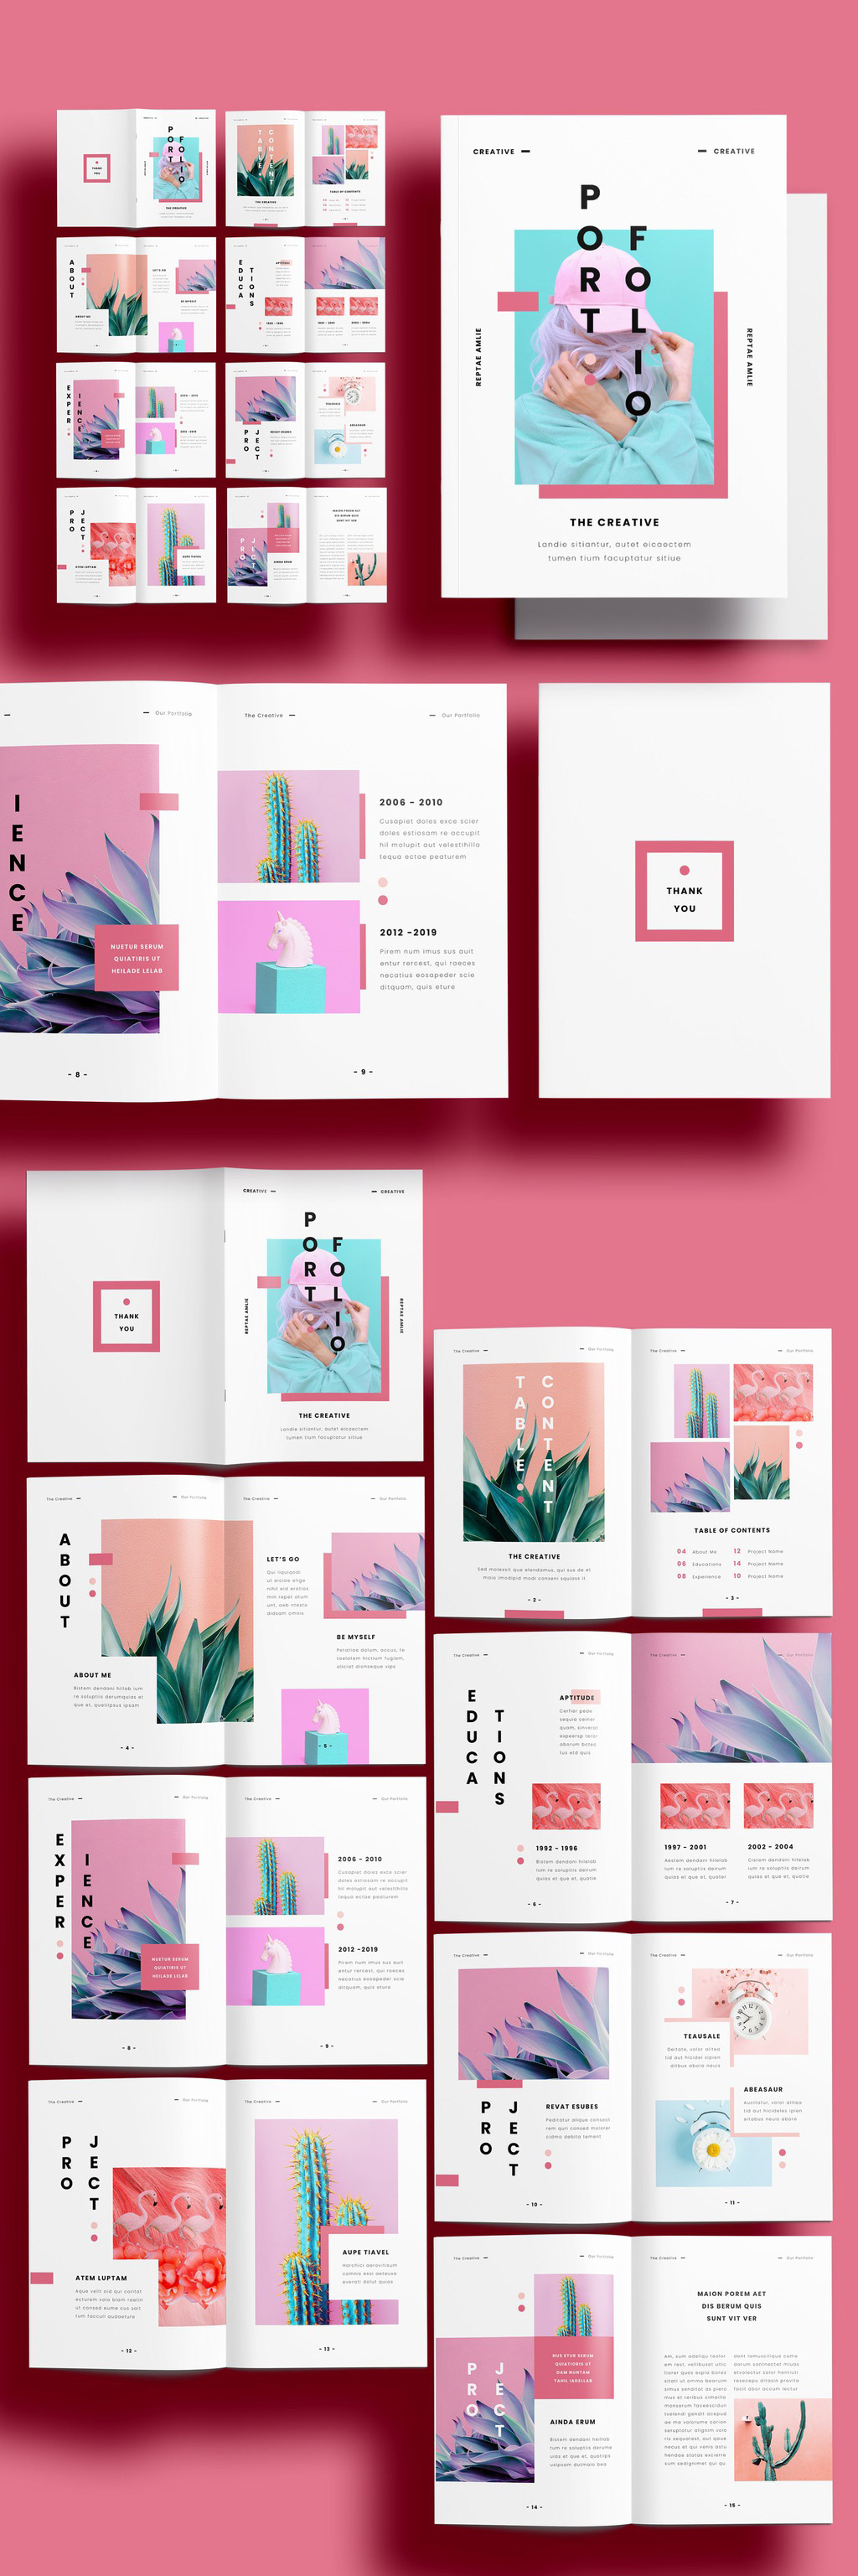 A fashionable pink portfolio template for Adobe InDesign.